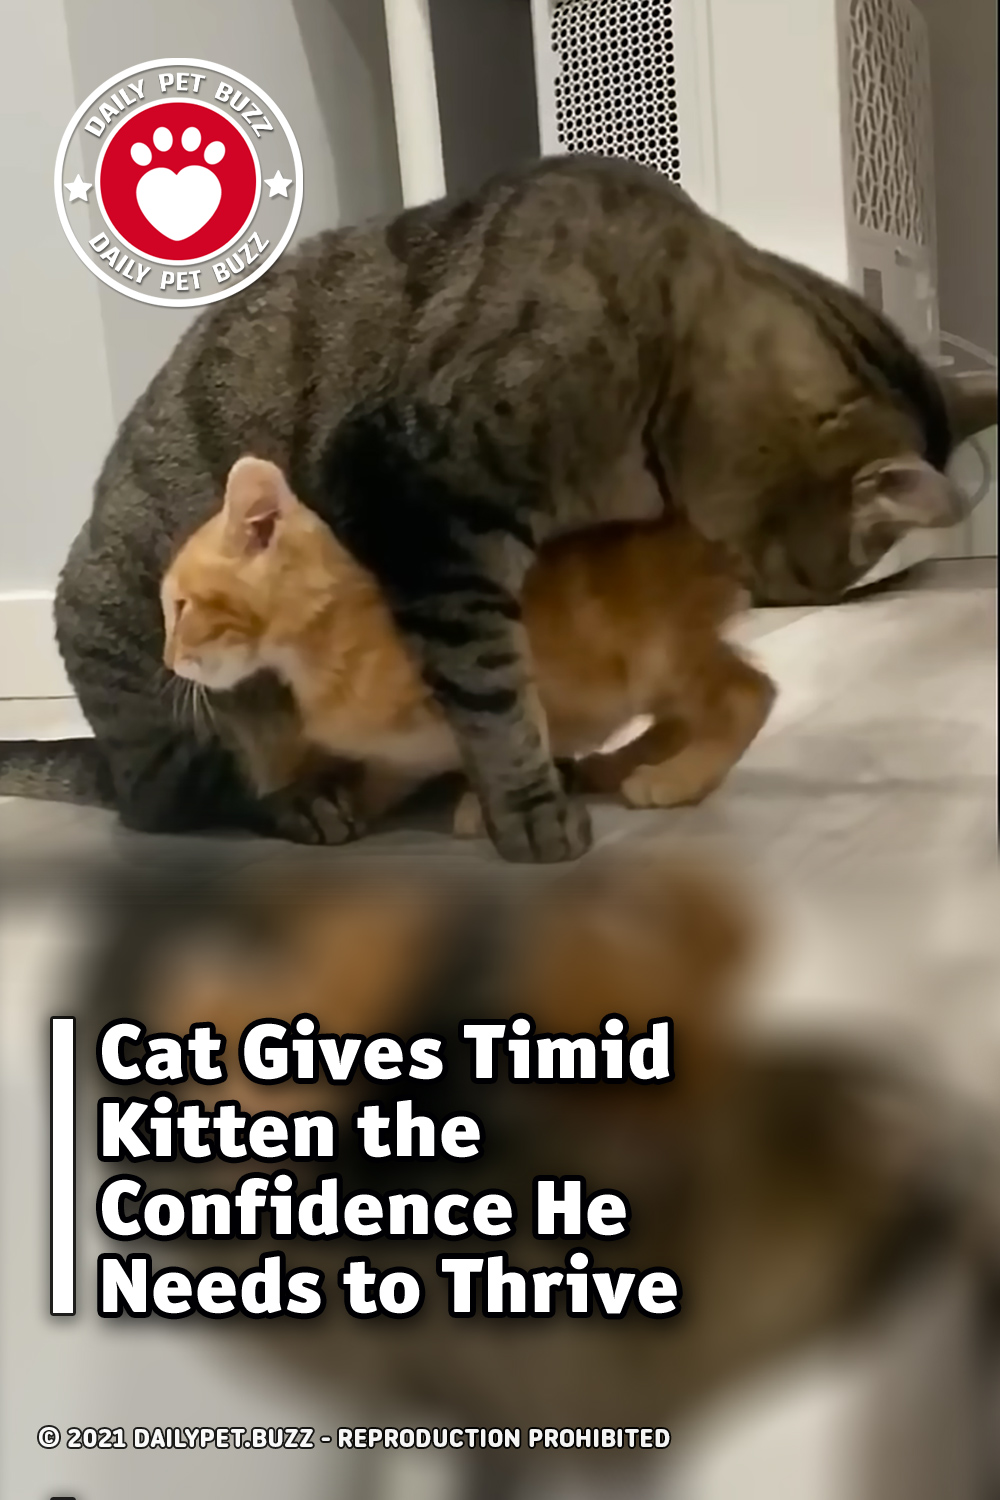 Cat Gives Timid Kitten the Confidence He Needs to Thrive